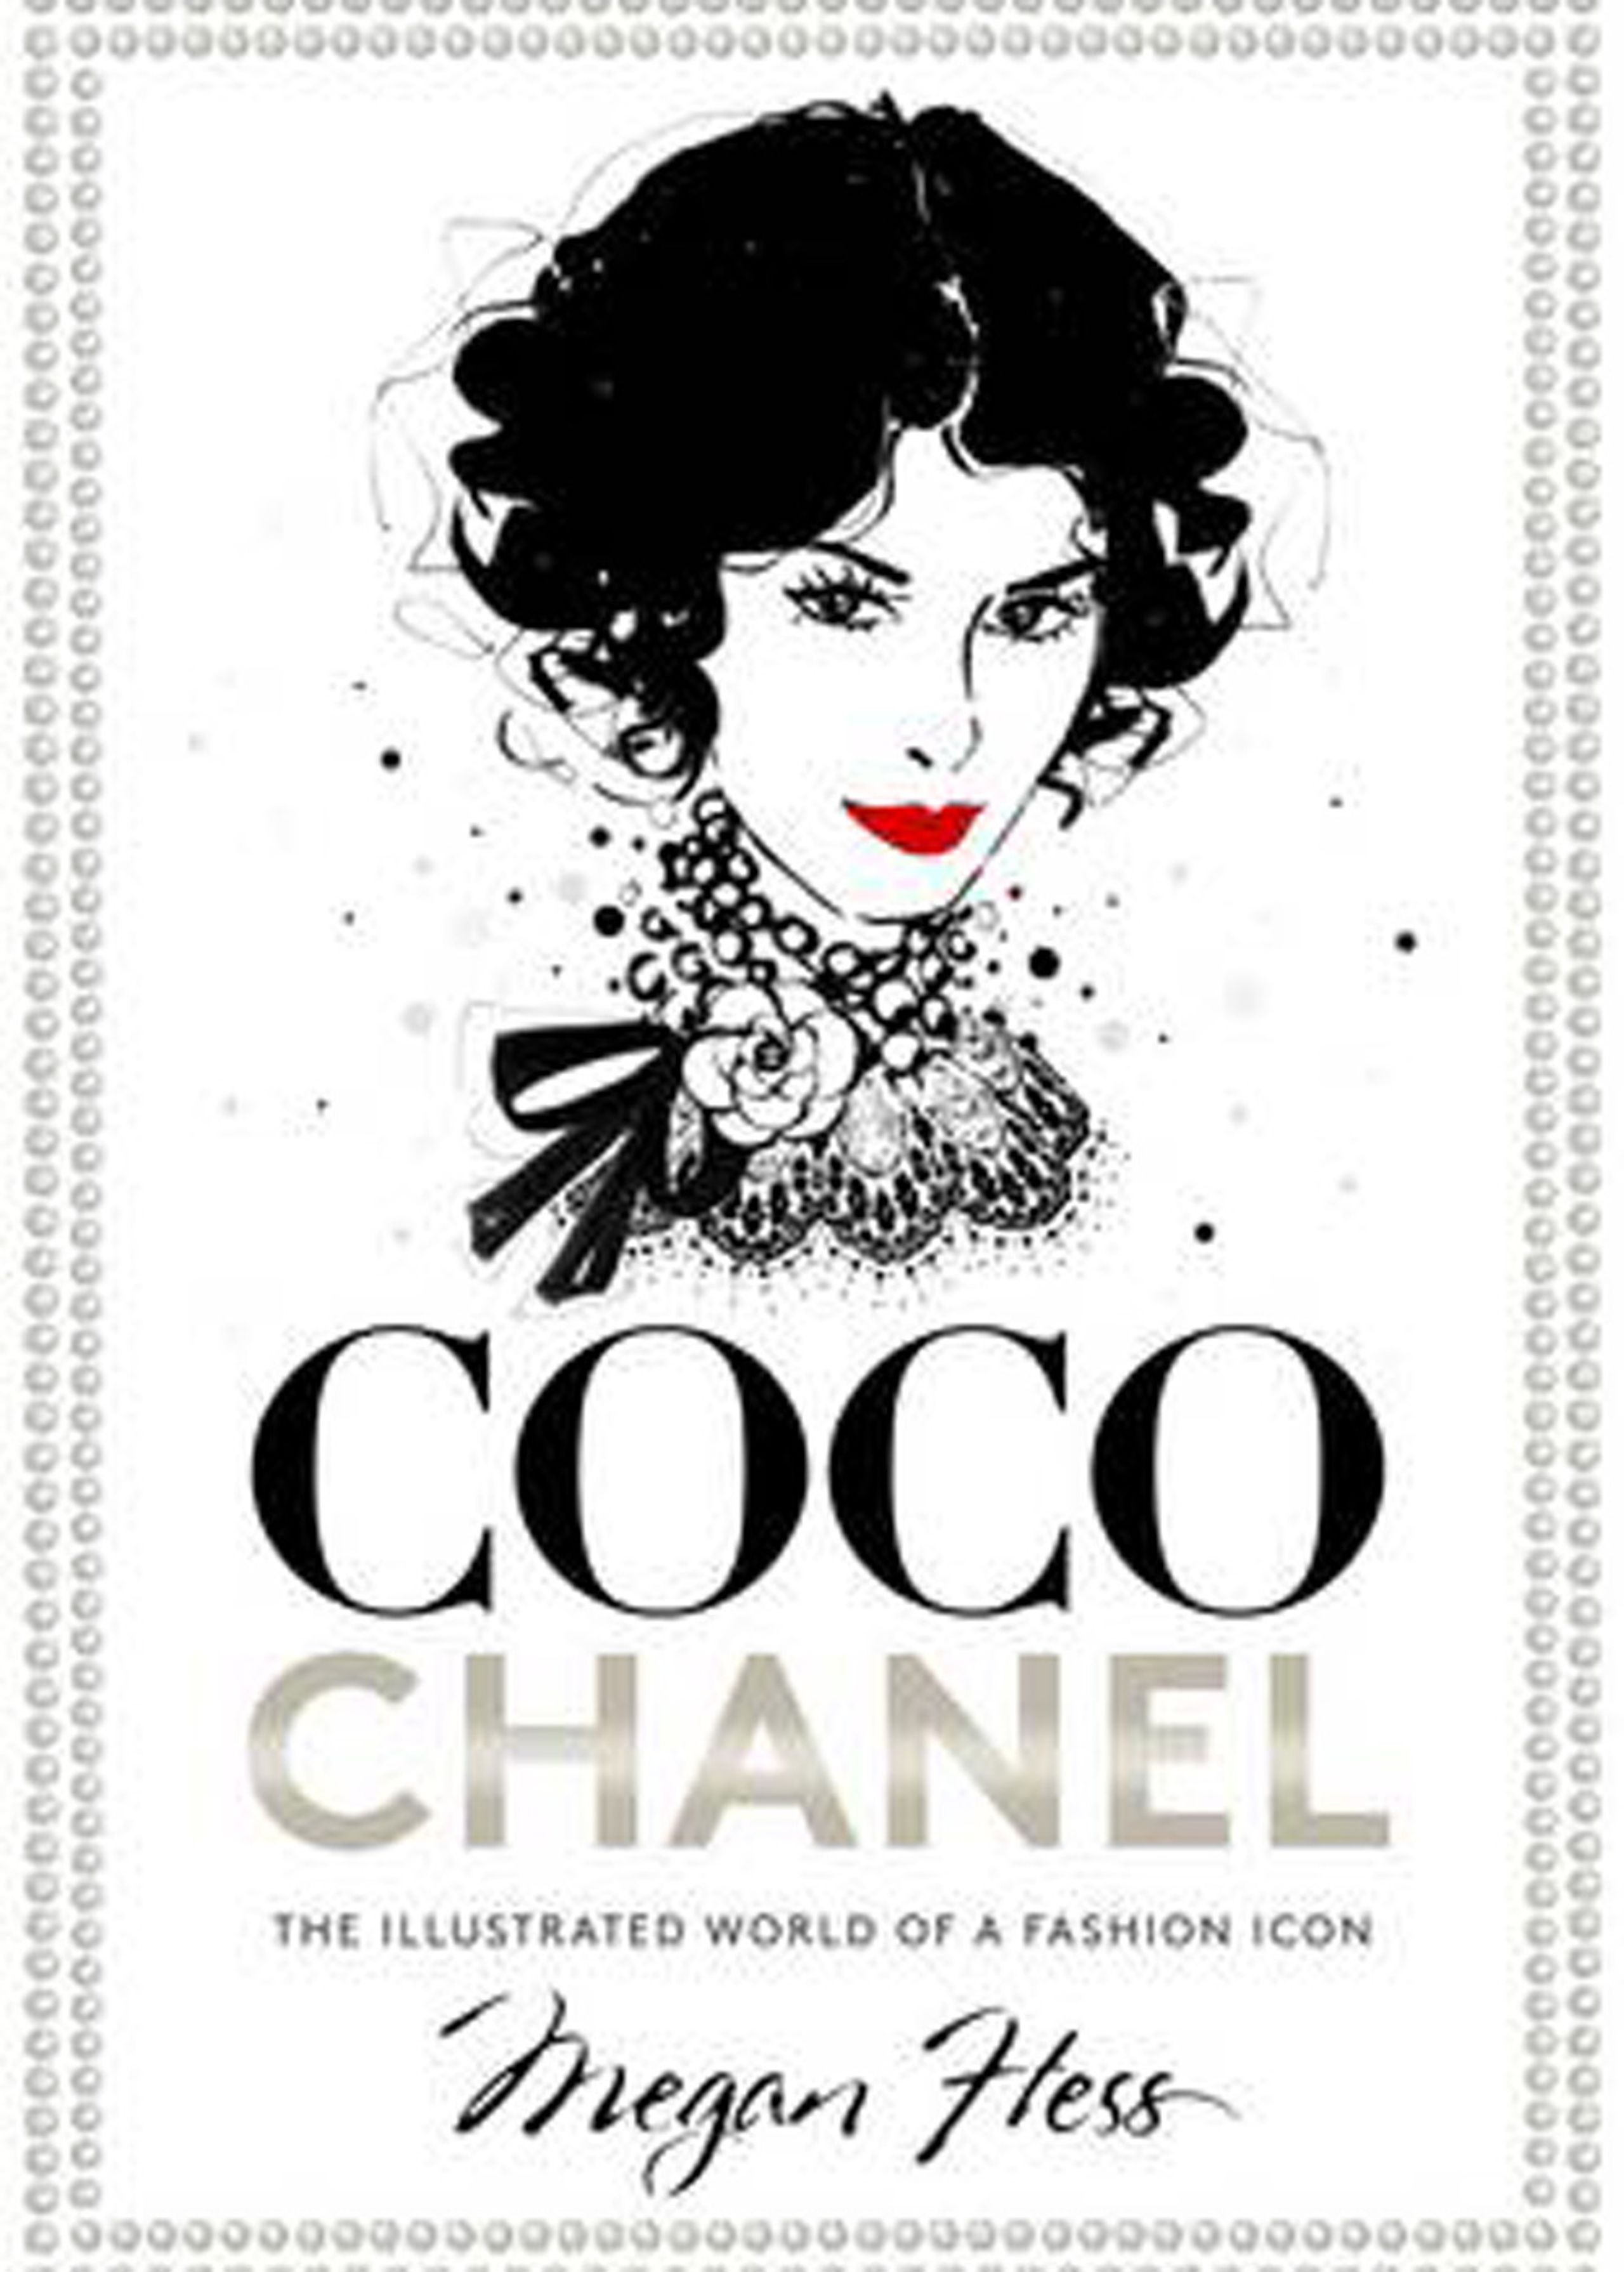 Coco Chanel - The Illustrated World of a Fashion Icon - Livro - New Mags